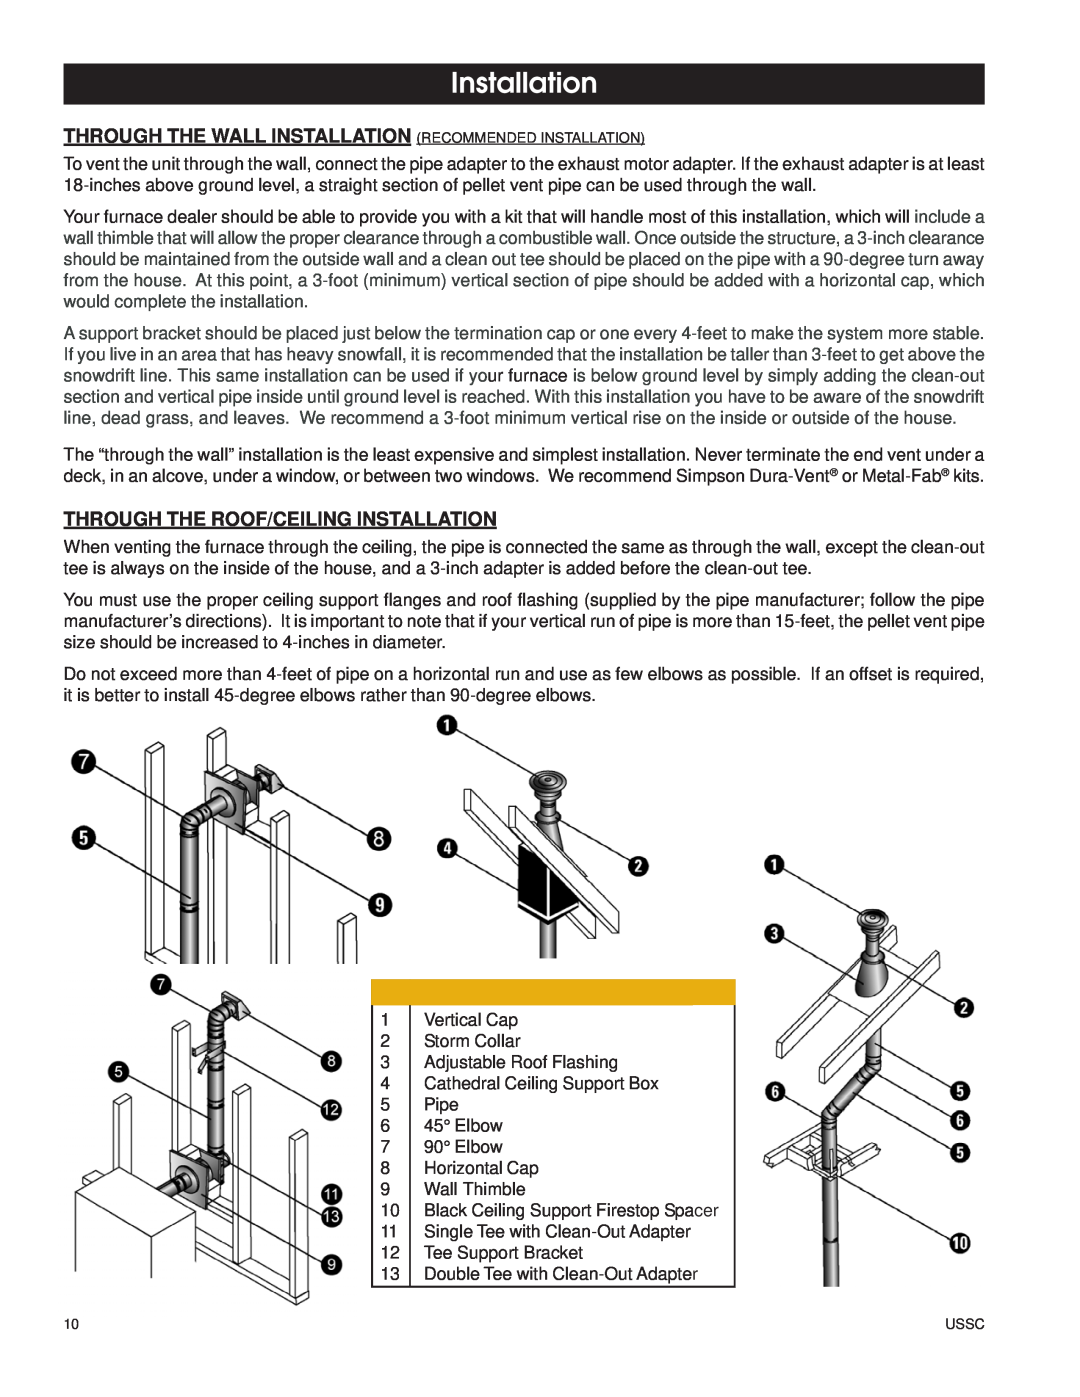 United States Stove 6100 owner manual Through The Roof/Ceiling Installation 